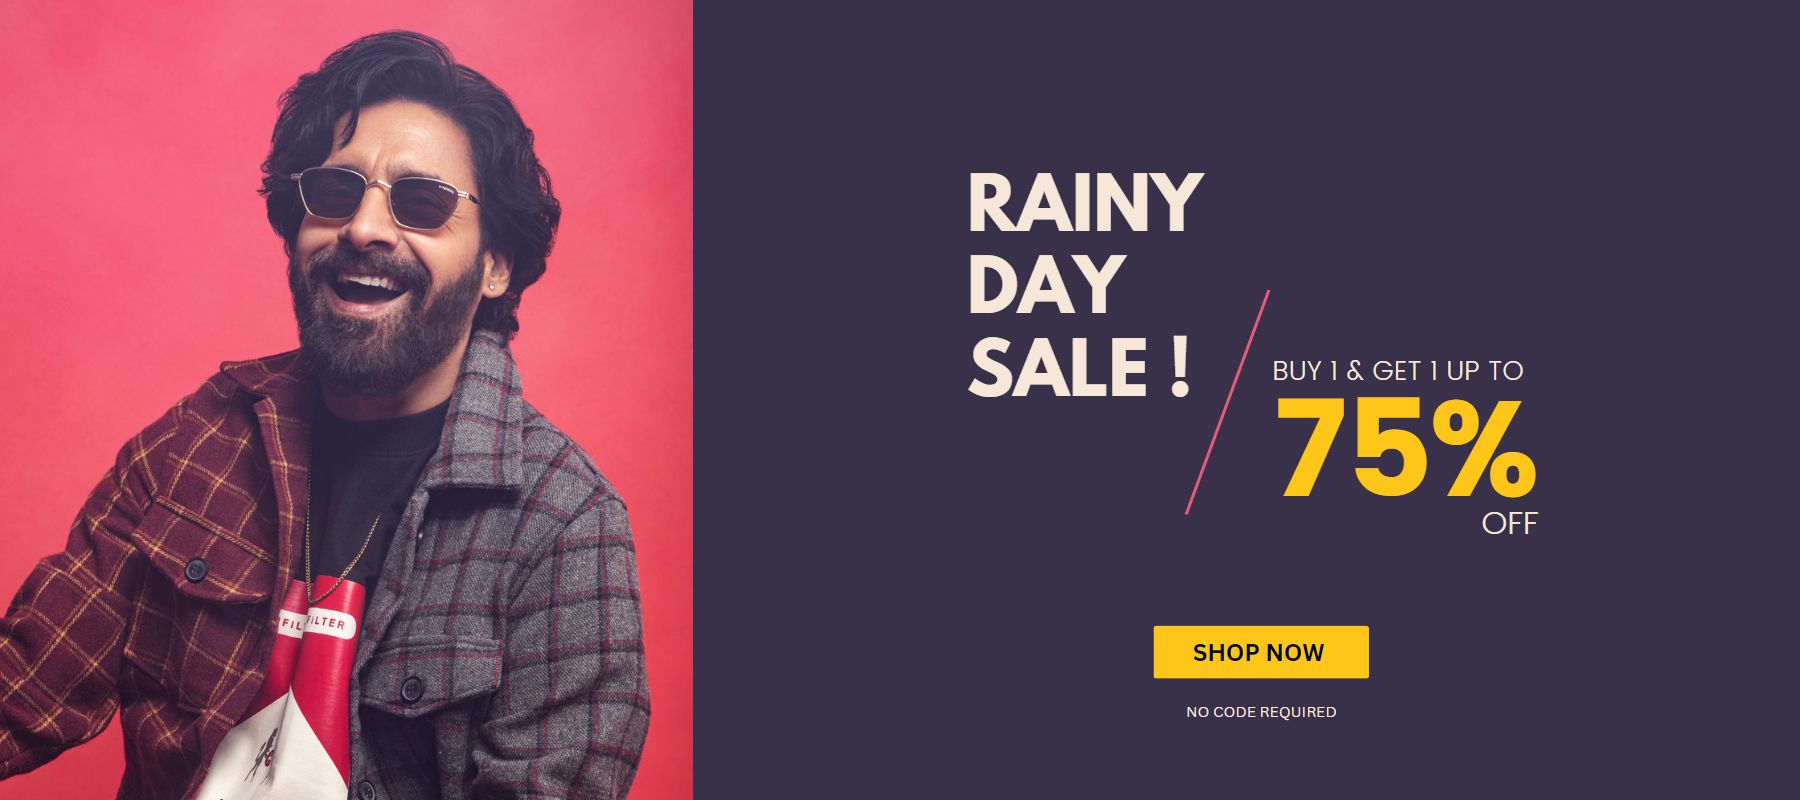 Discover Sunglassic's Stylish Collection with Actor Chandan Roy Sanyal - Limited Time Offer: Buy 1 & Get 1 up to 75% off